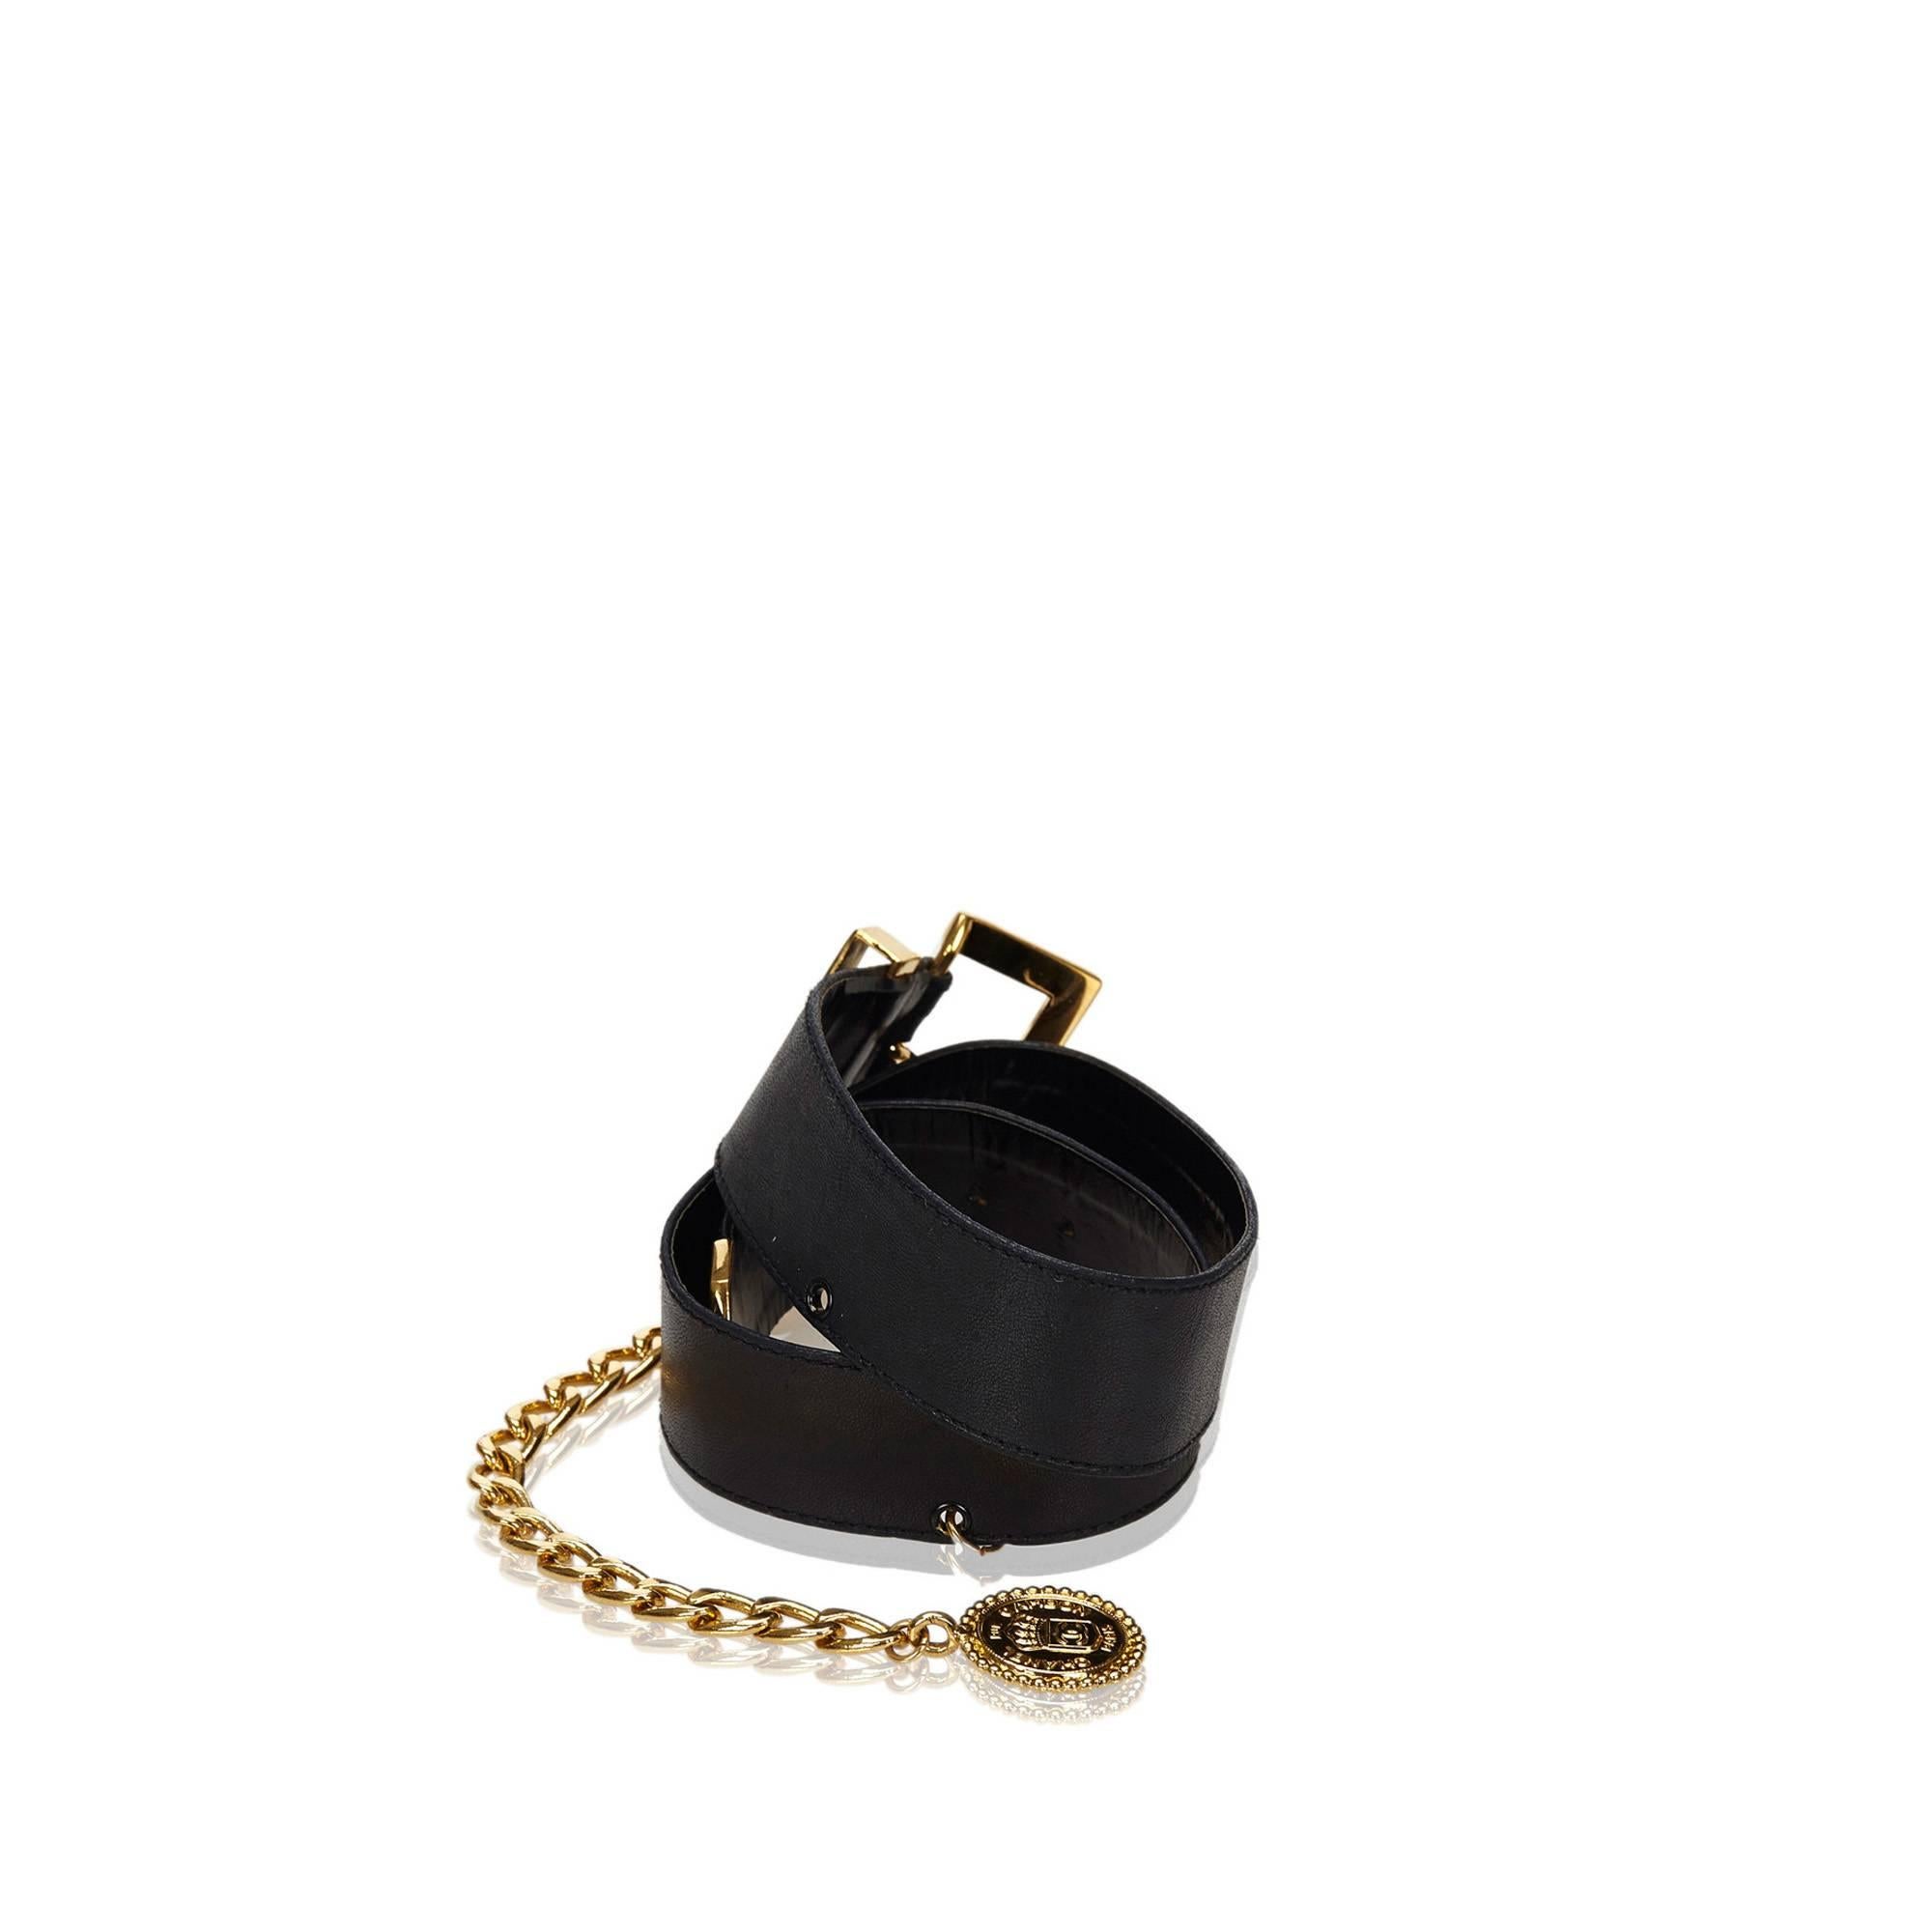 Chanel Black Leather Waist Strap Gold-Toned Buckle and Chain Belt with Medallion 1